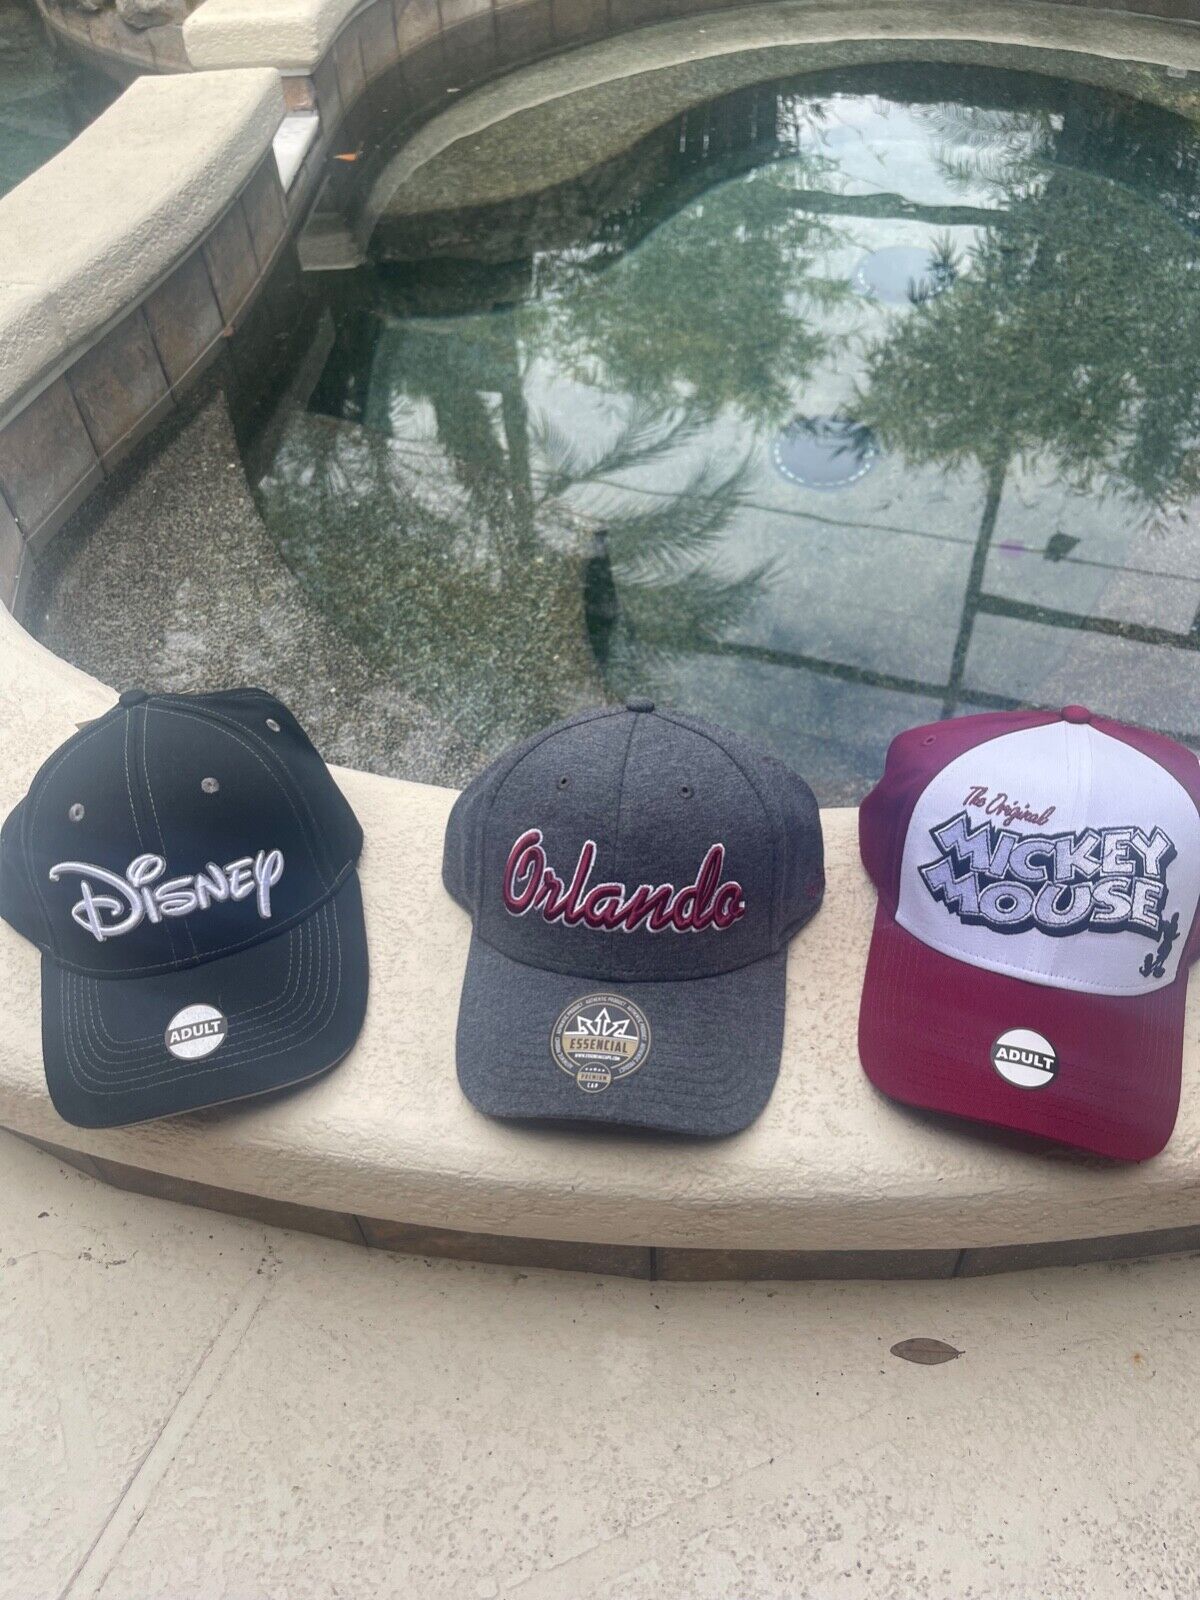 Disney Set of 3 Baseball Hats - brand new with tags bundle includes Disney Coll